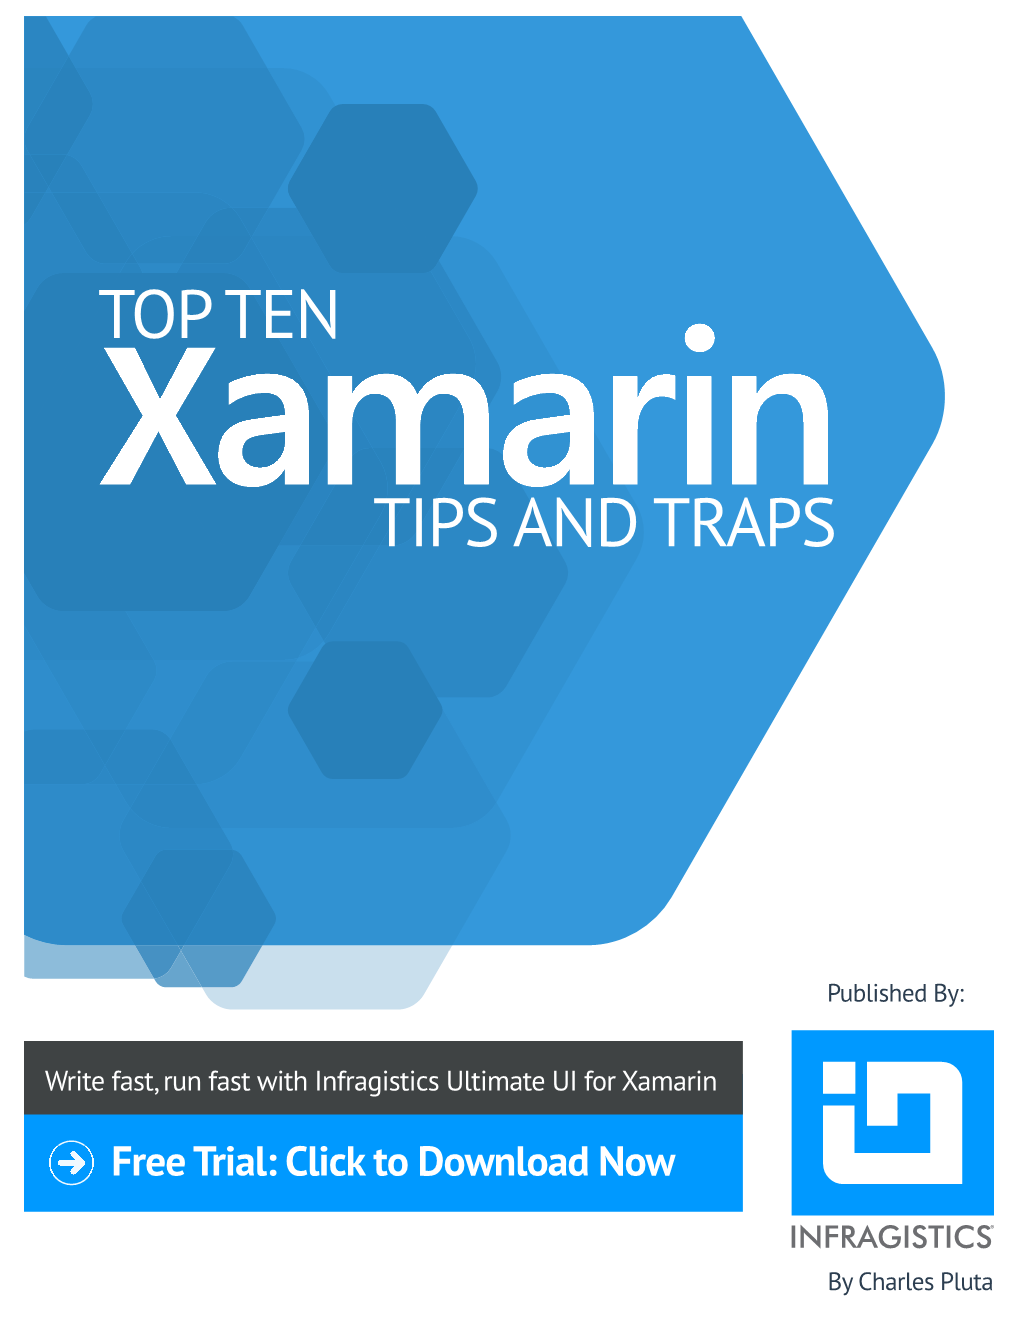 Tips and Traps Top